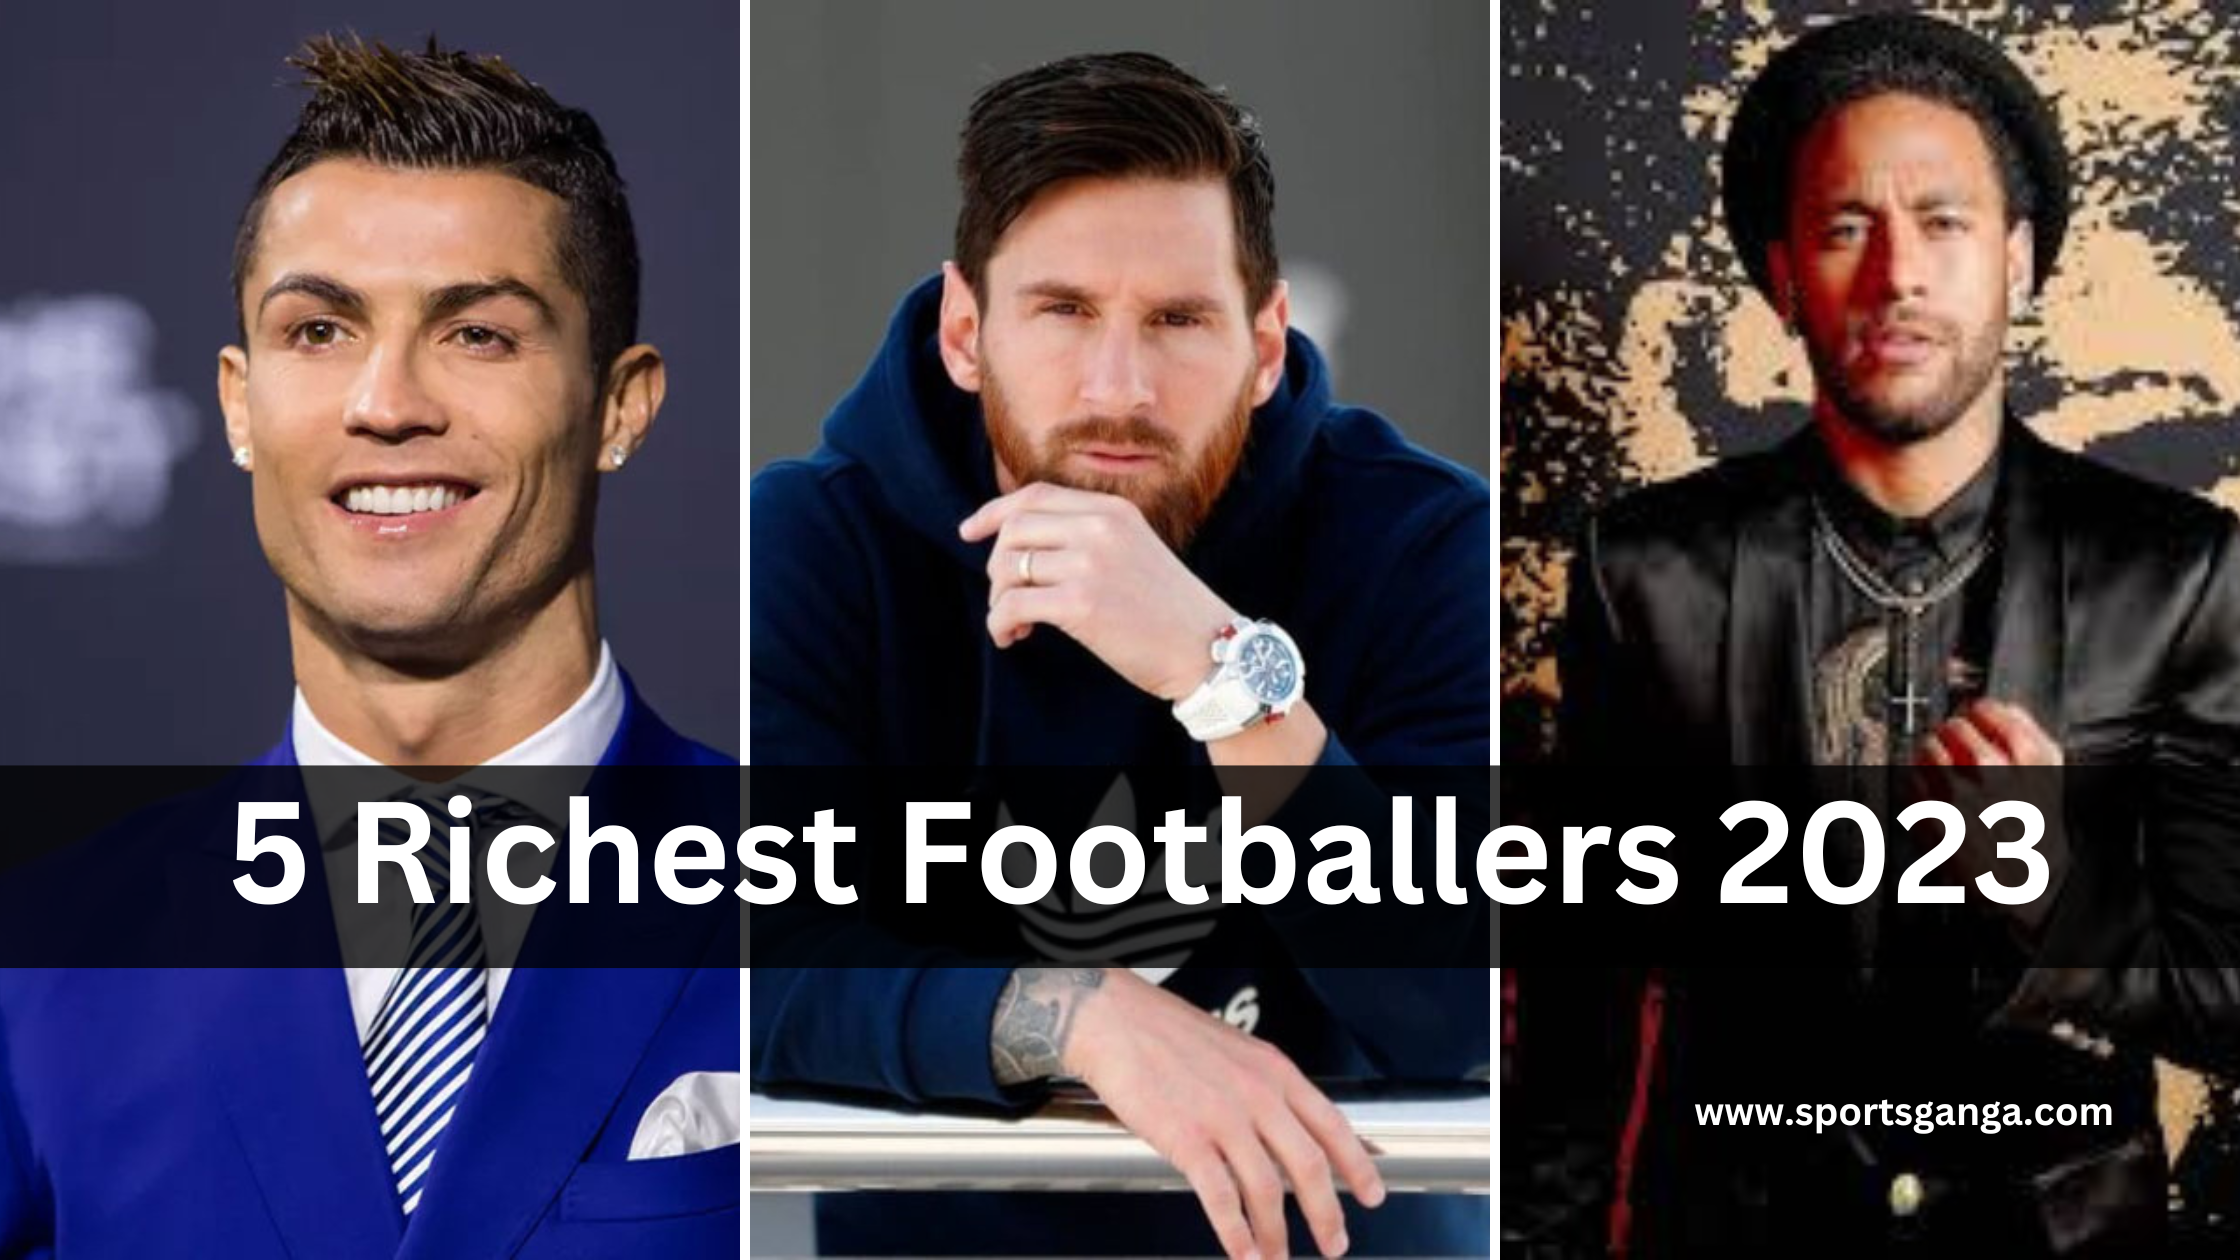 Top 5 Richest Footballers In The World And Their Net Worth In 2023